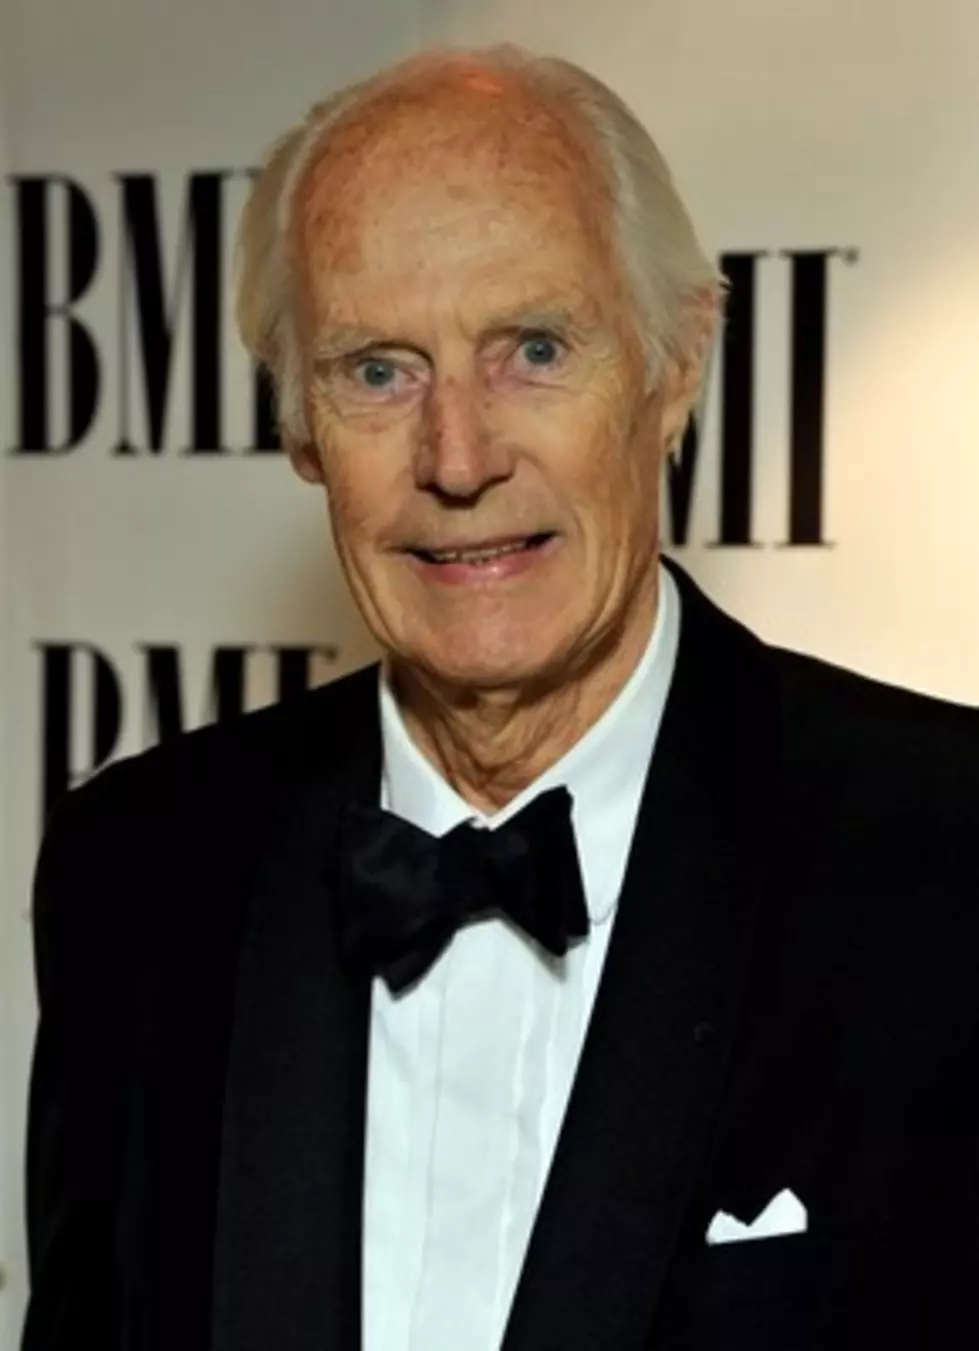 Beatles Producer George Martin In New Documentary